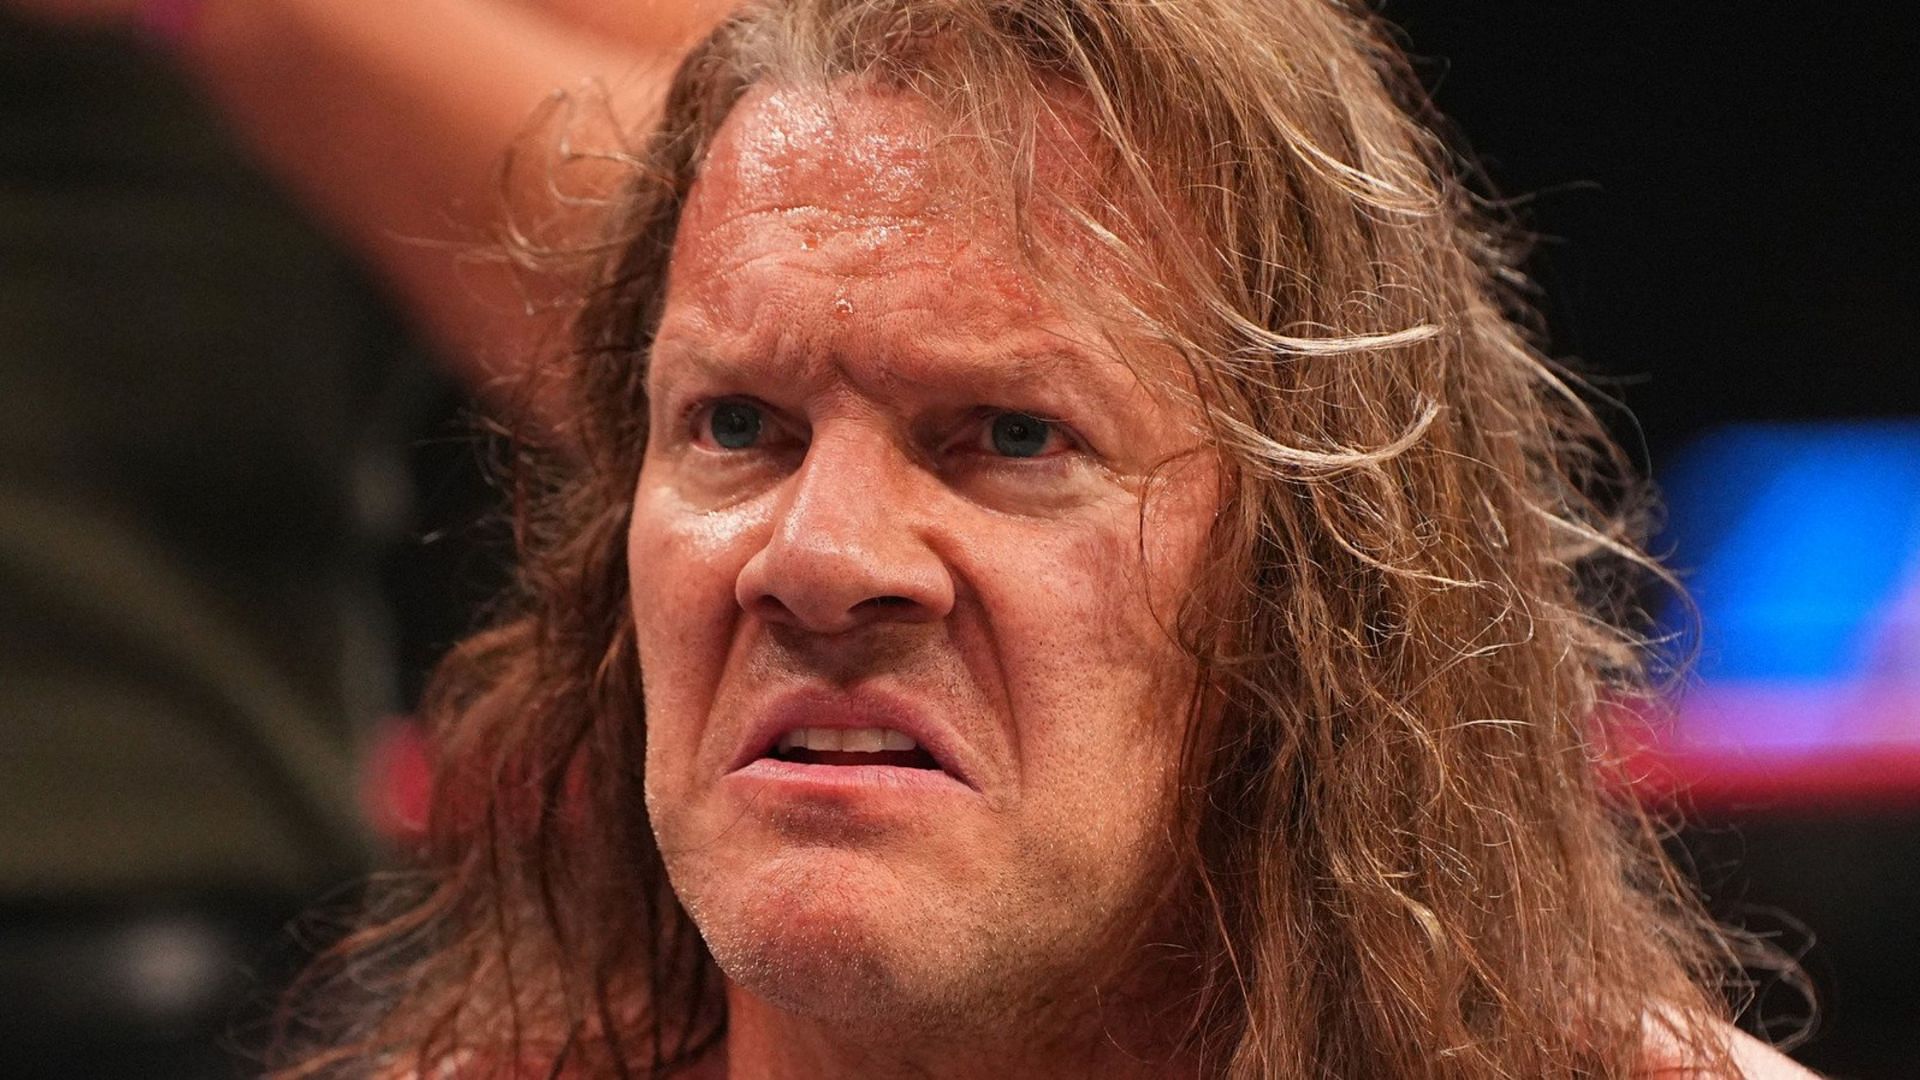 WWE legend and current AEW star Chris Jericho